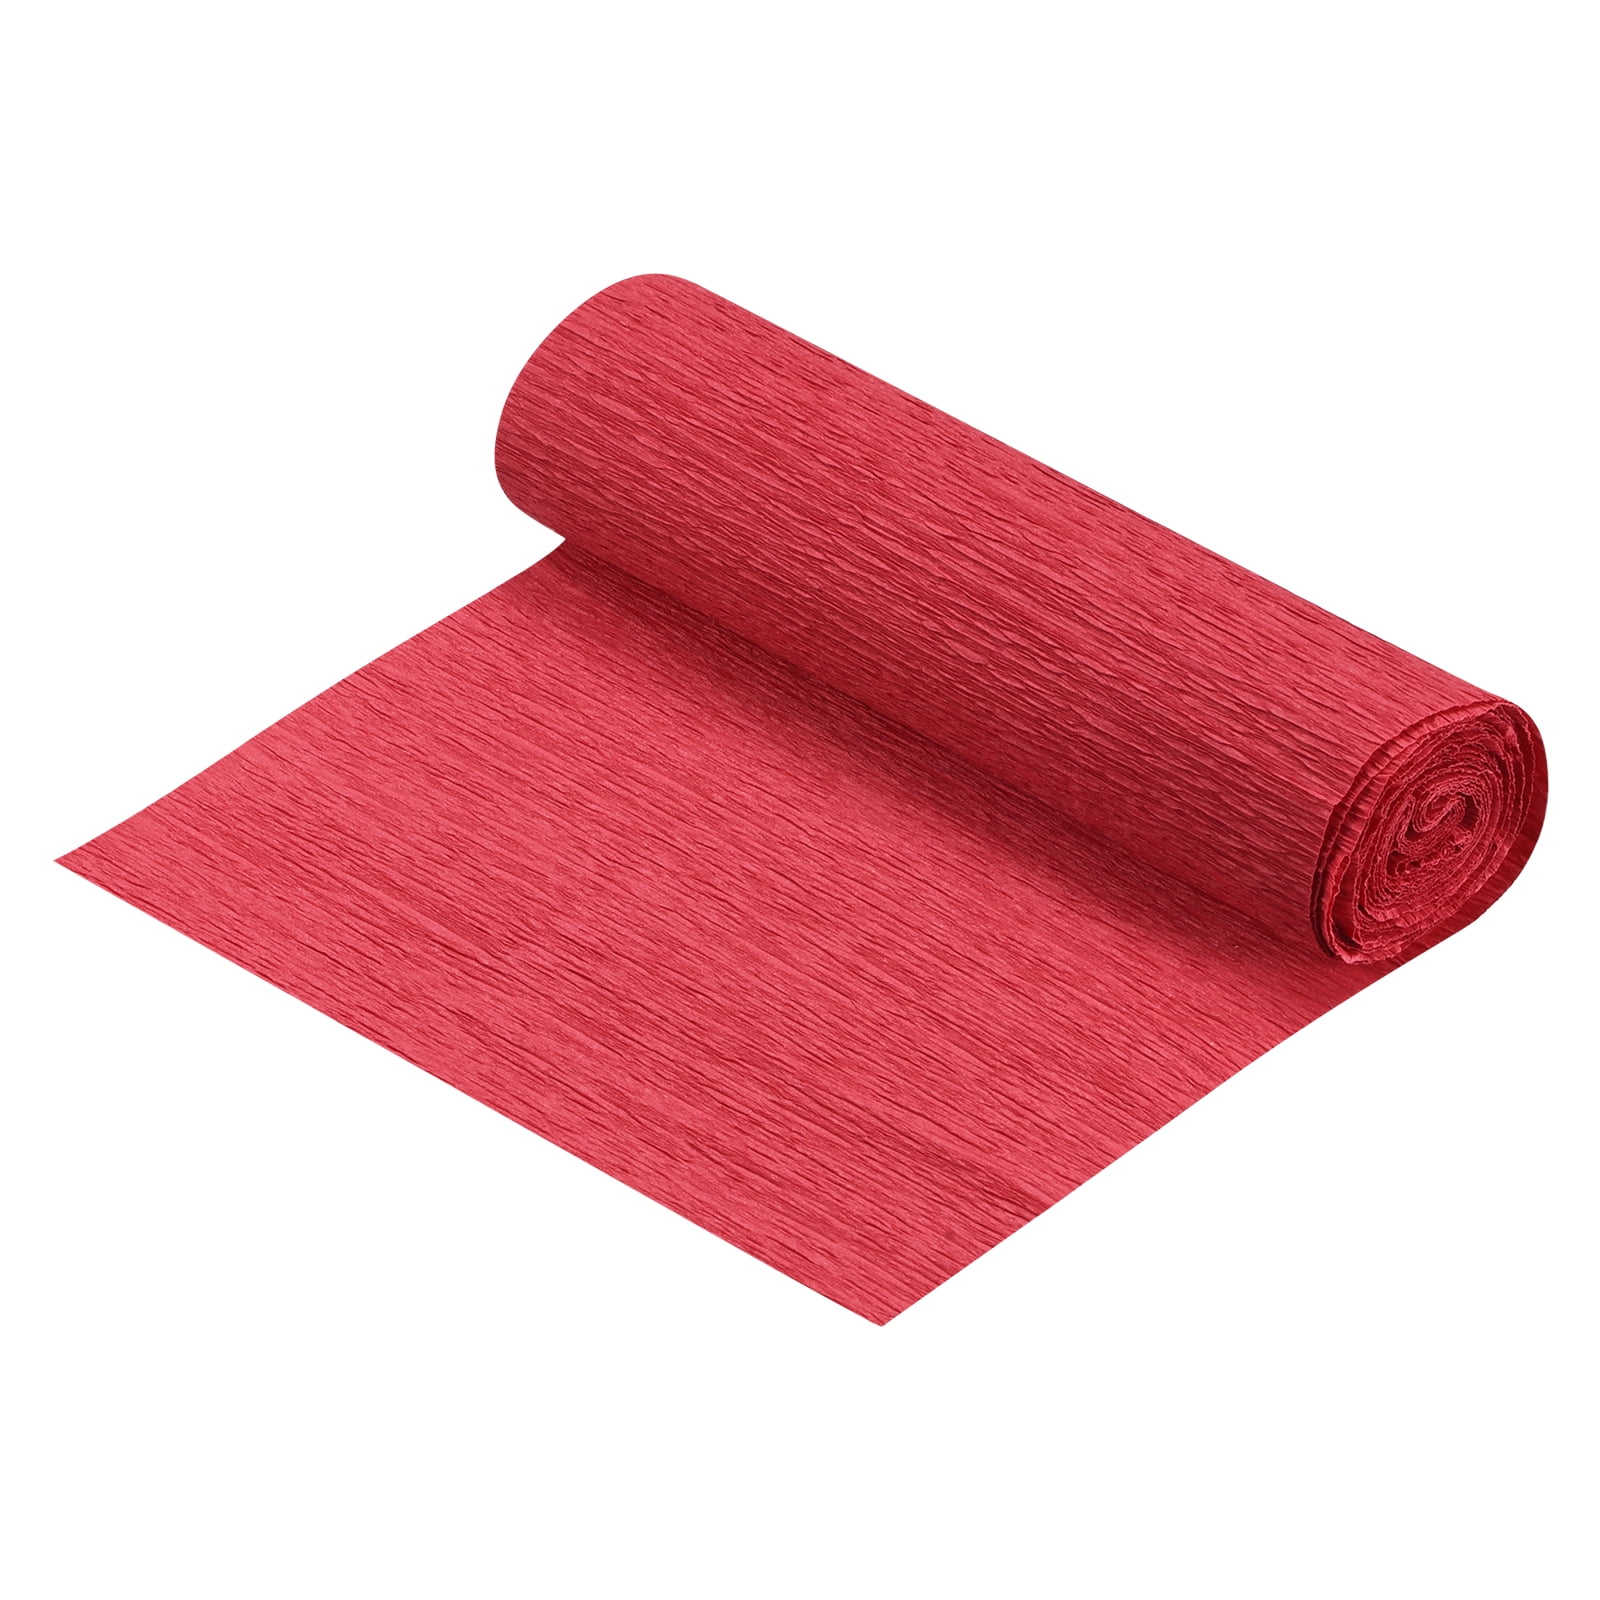  Crepe Paper Rolls, MicButty 42 Pieces Red Crepe Paper